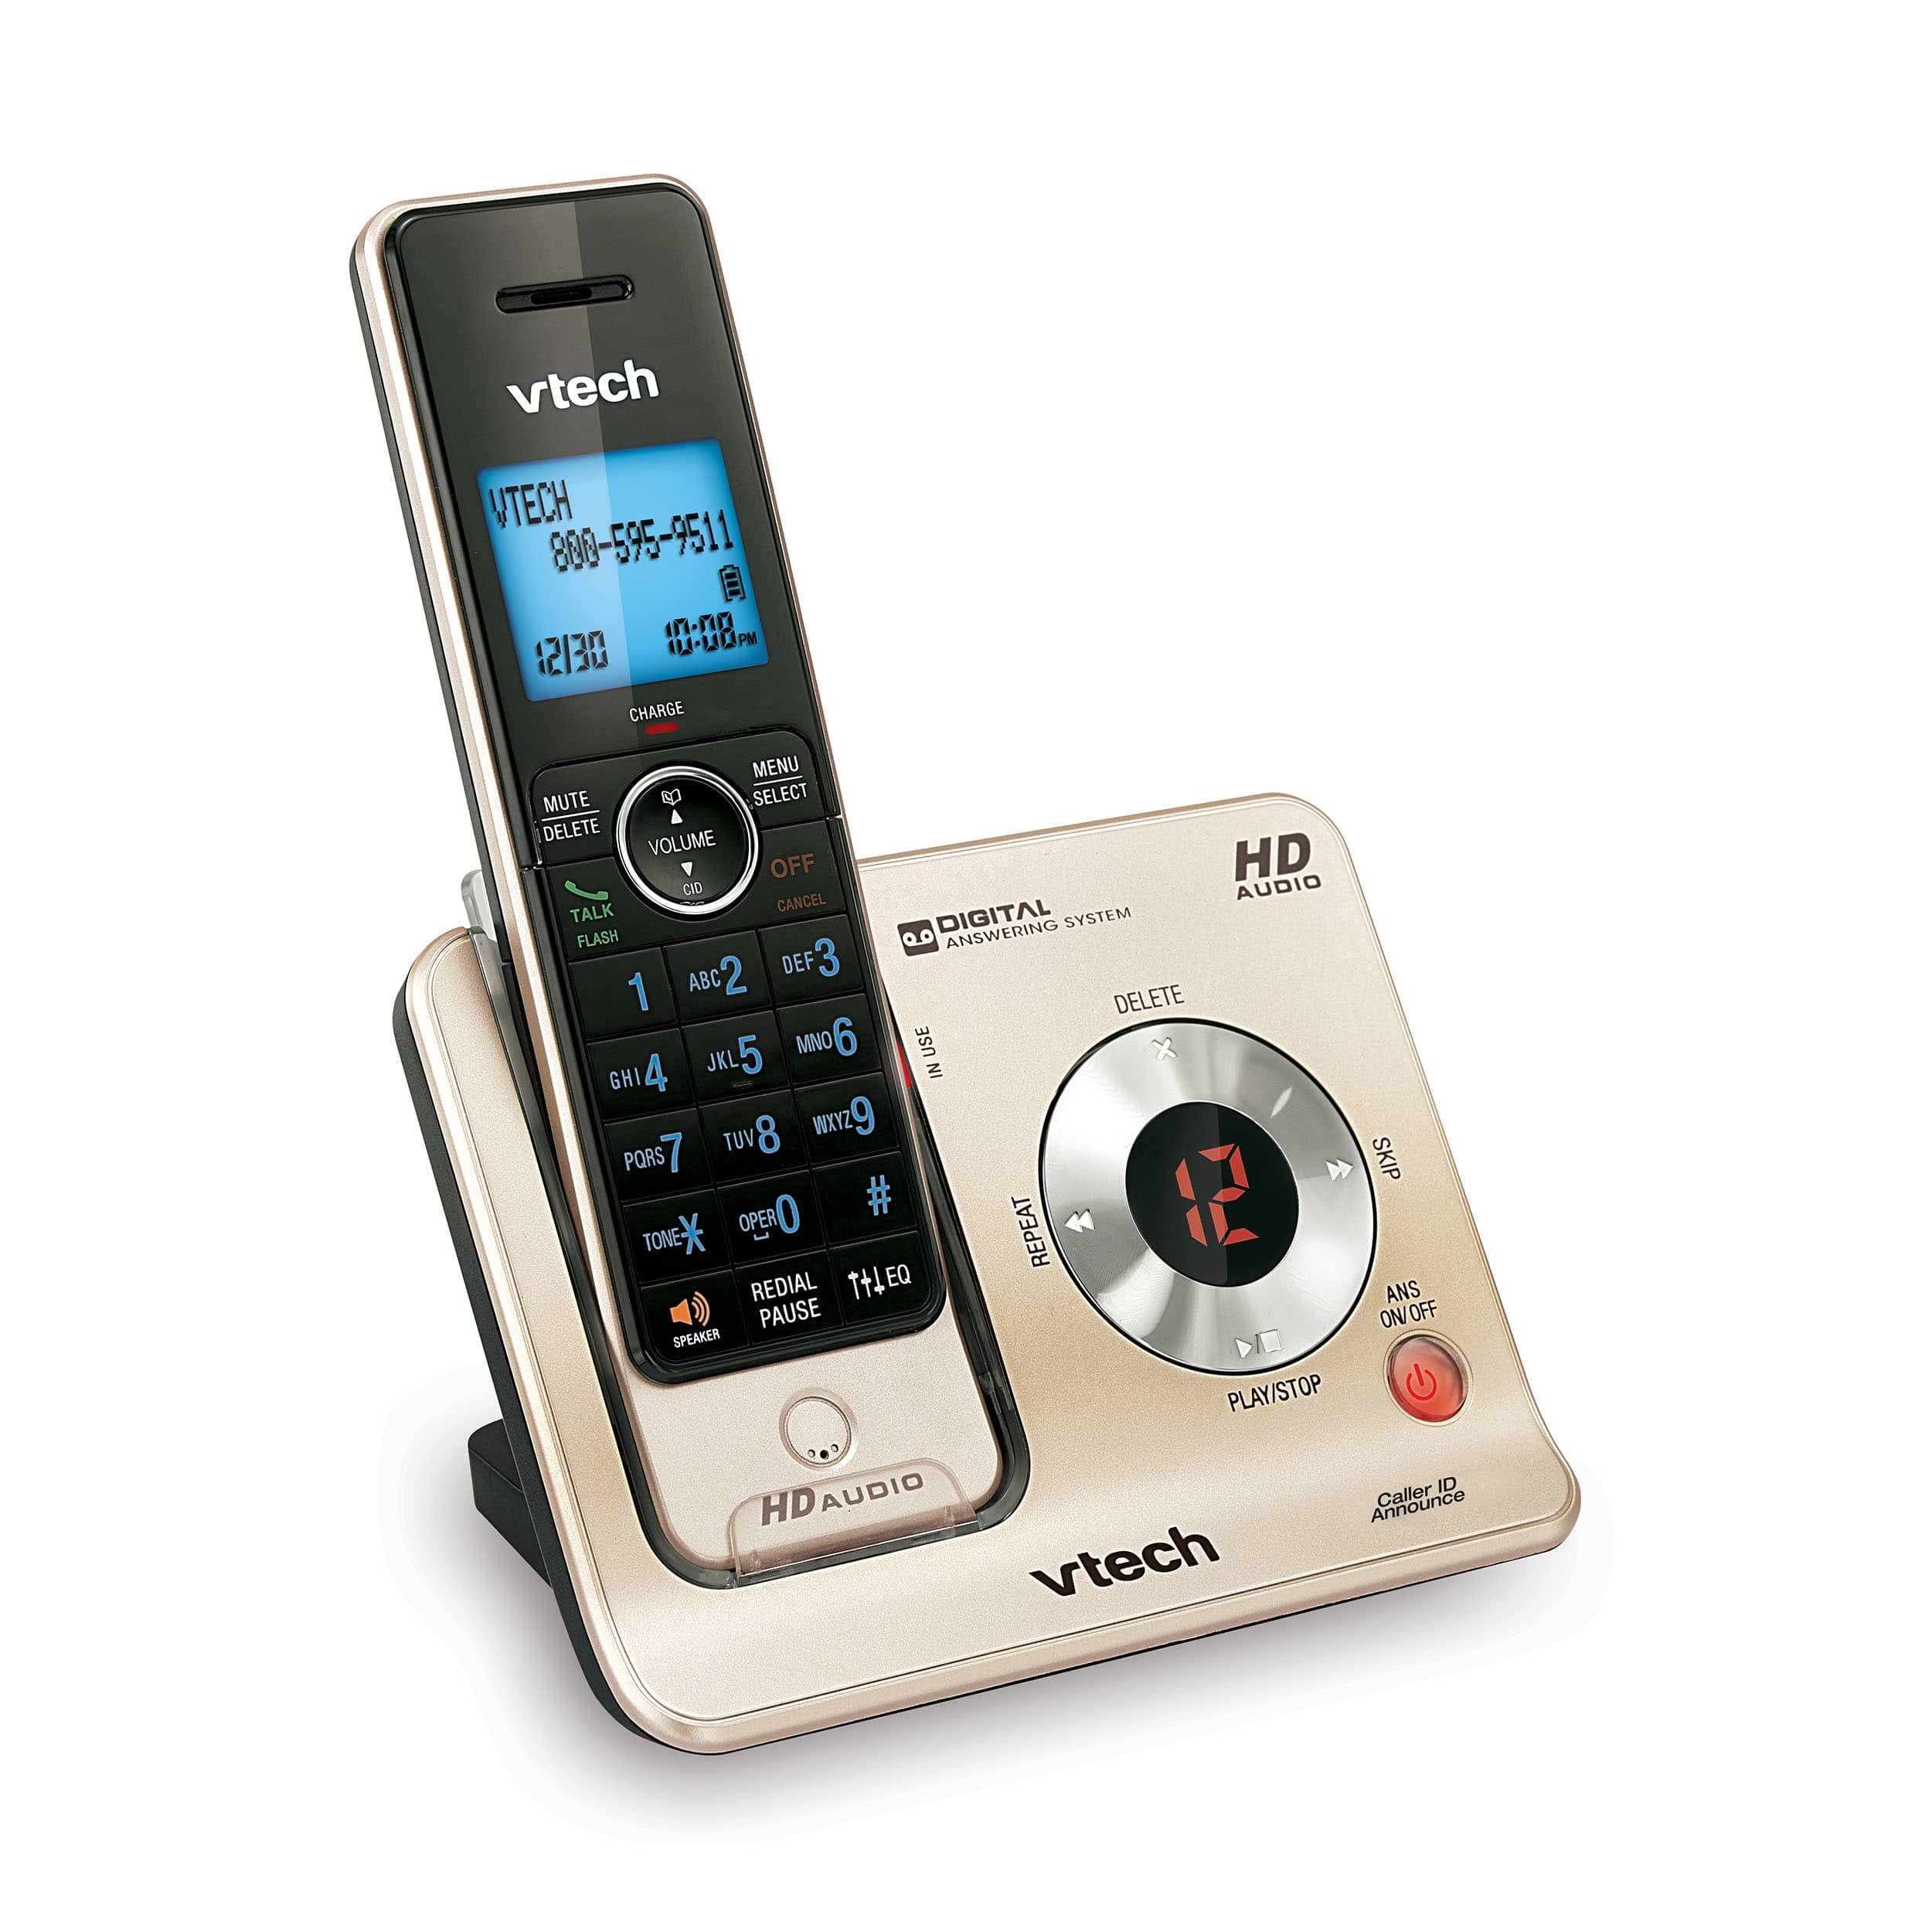 5 Handset Phone System with Caller ID/Call Waiting